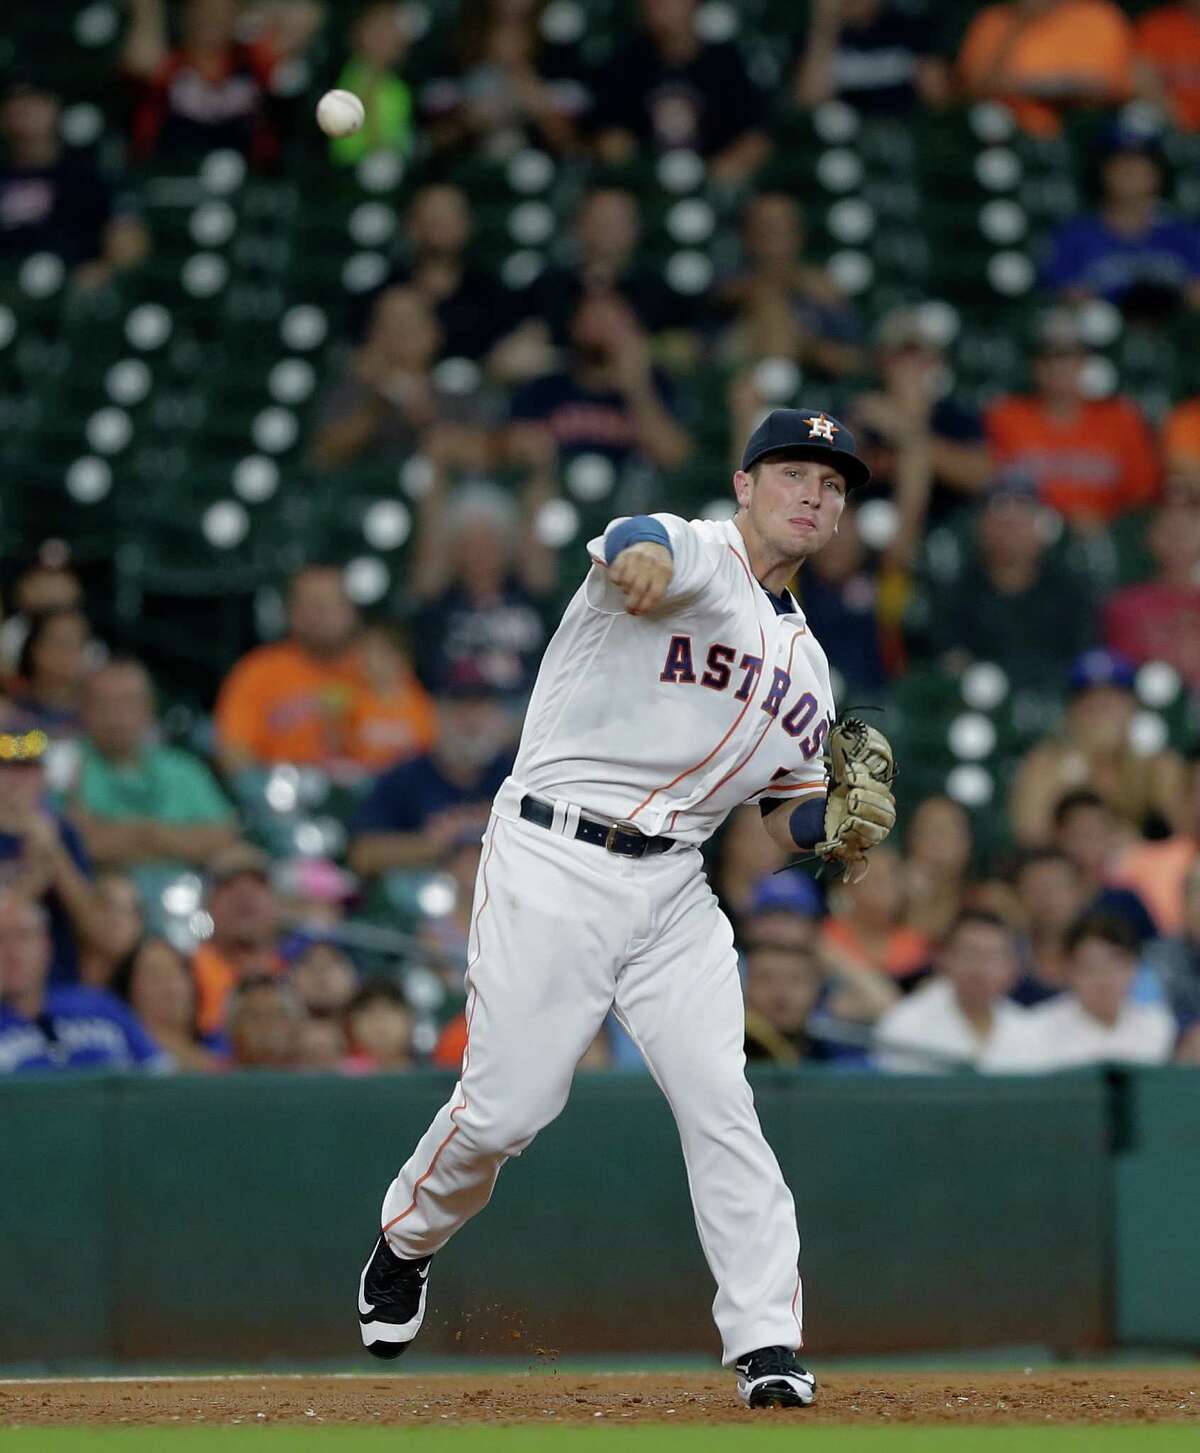 Astros looking for Bregman to take next step in 2017